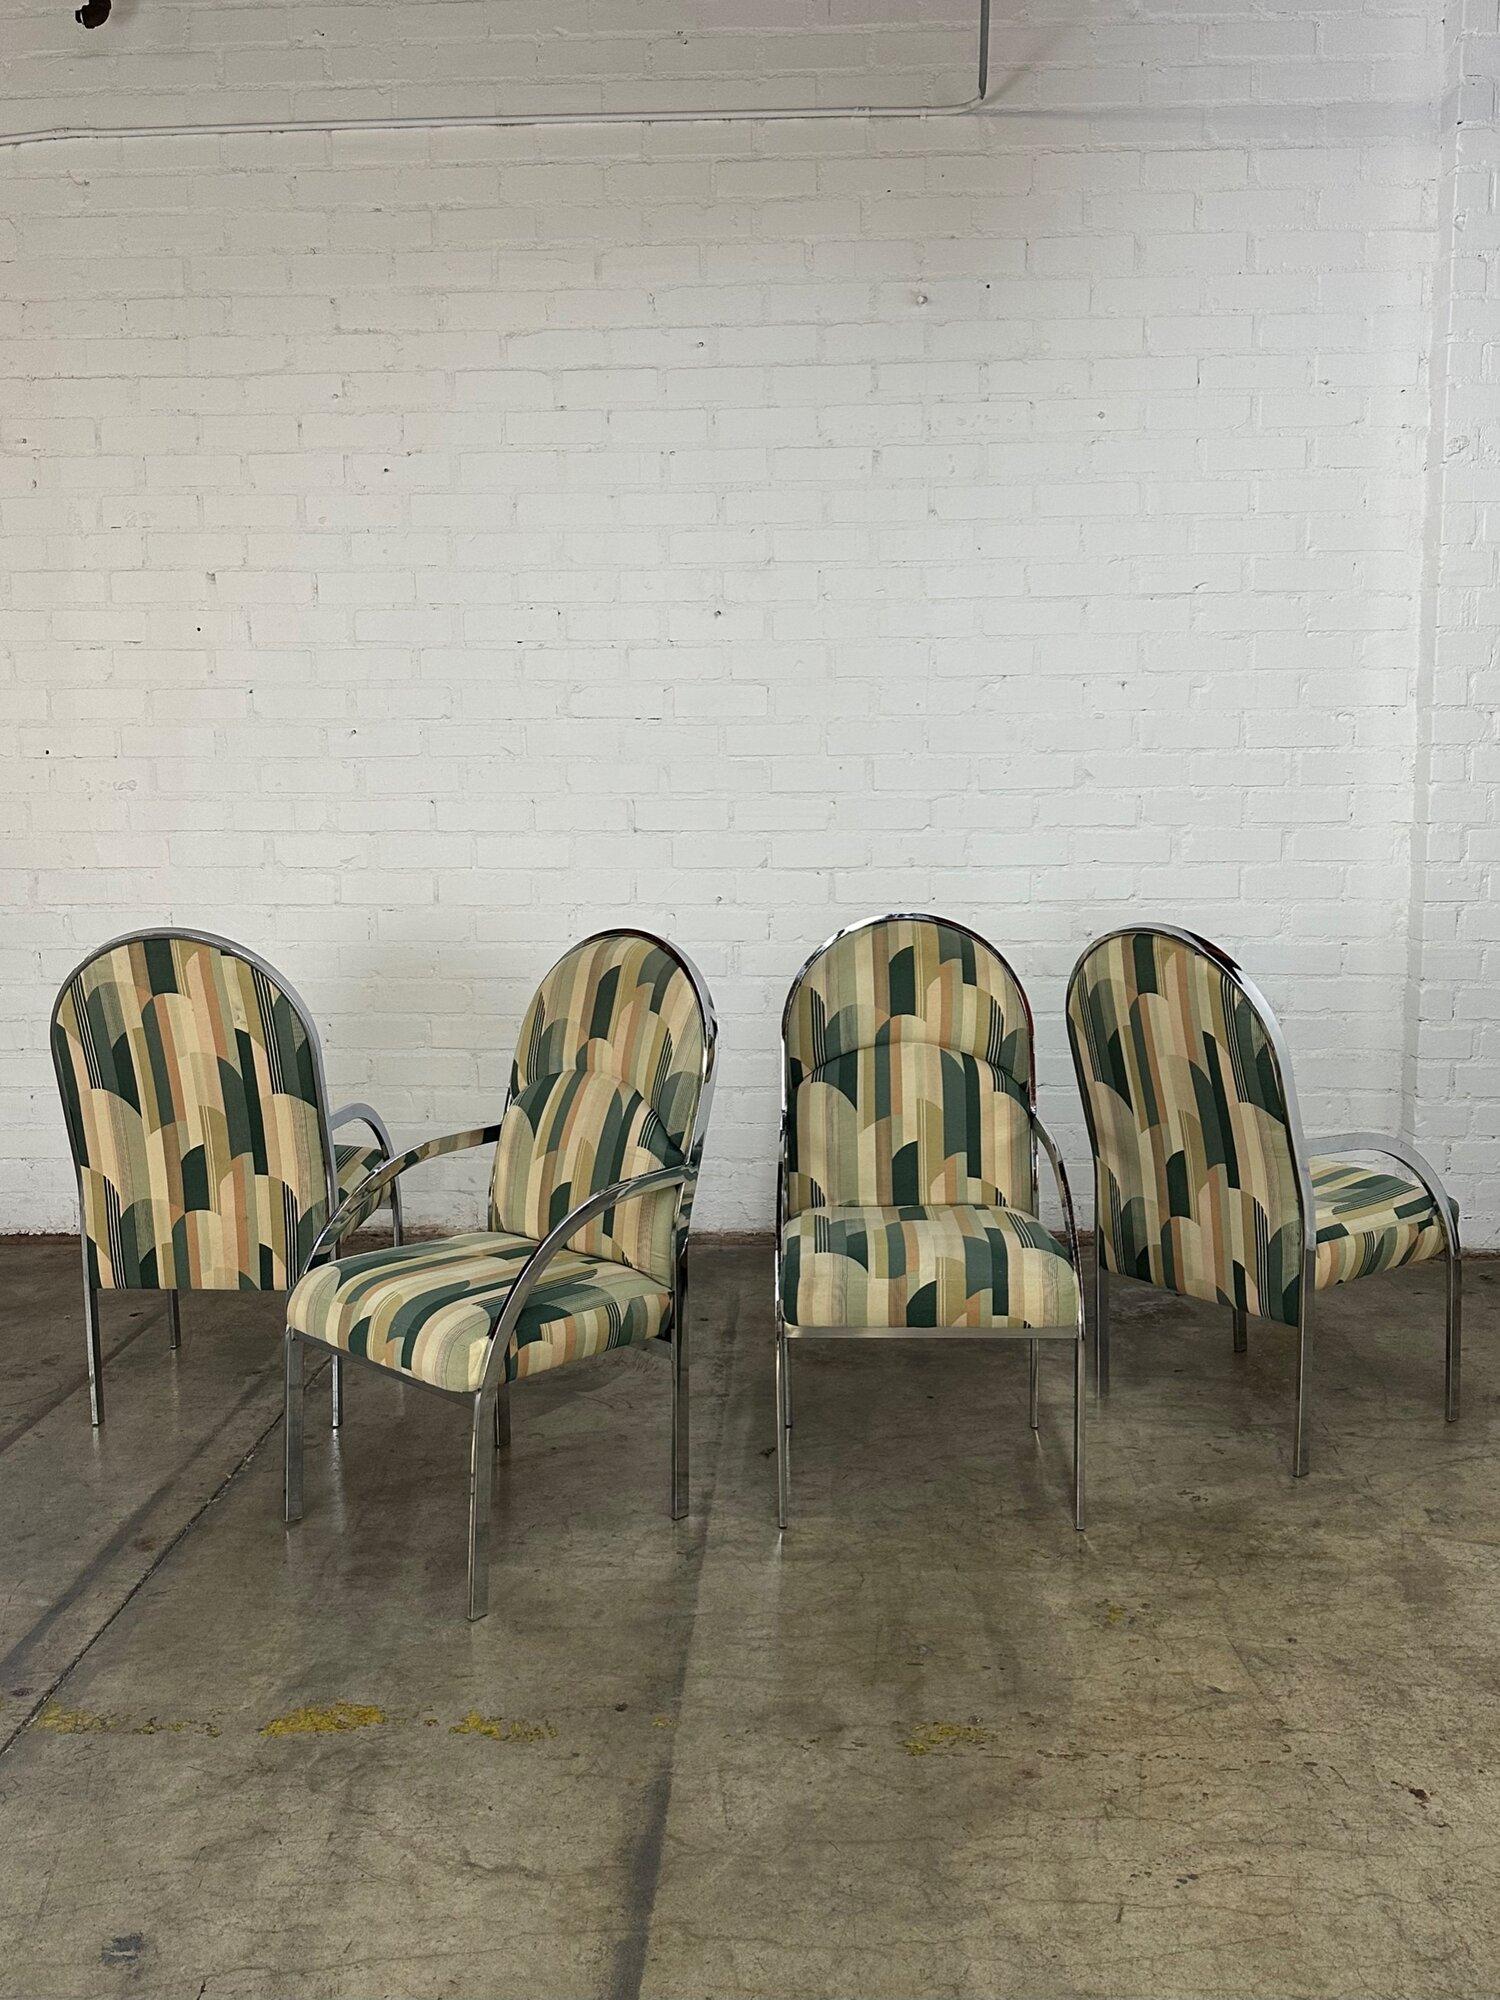 W22 D22 H40 SW19 SD17 SH18 AH25

Set of 4 Chrome Dining Chairs, in great vintage condition. Chairs are structurally sound and have no rips or tears. Upholstery features an art deco like pattern in shades of green and salmon.

circa 1970’s